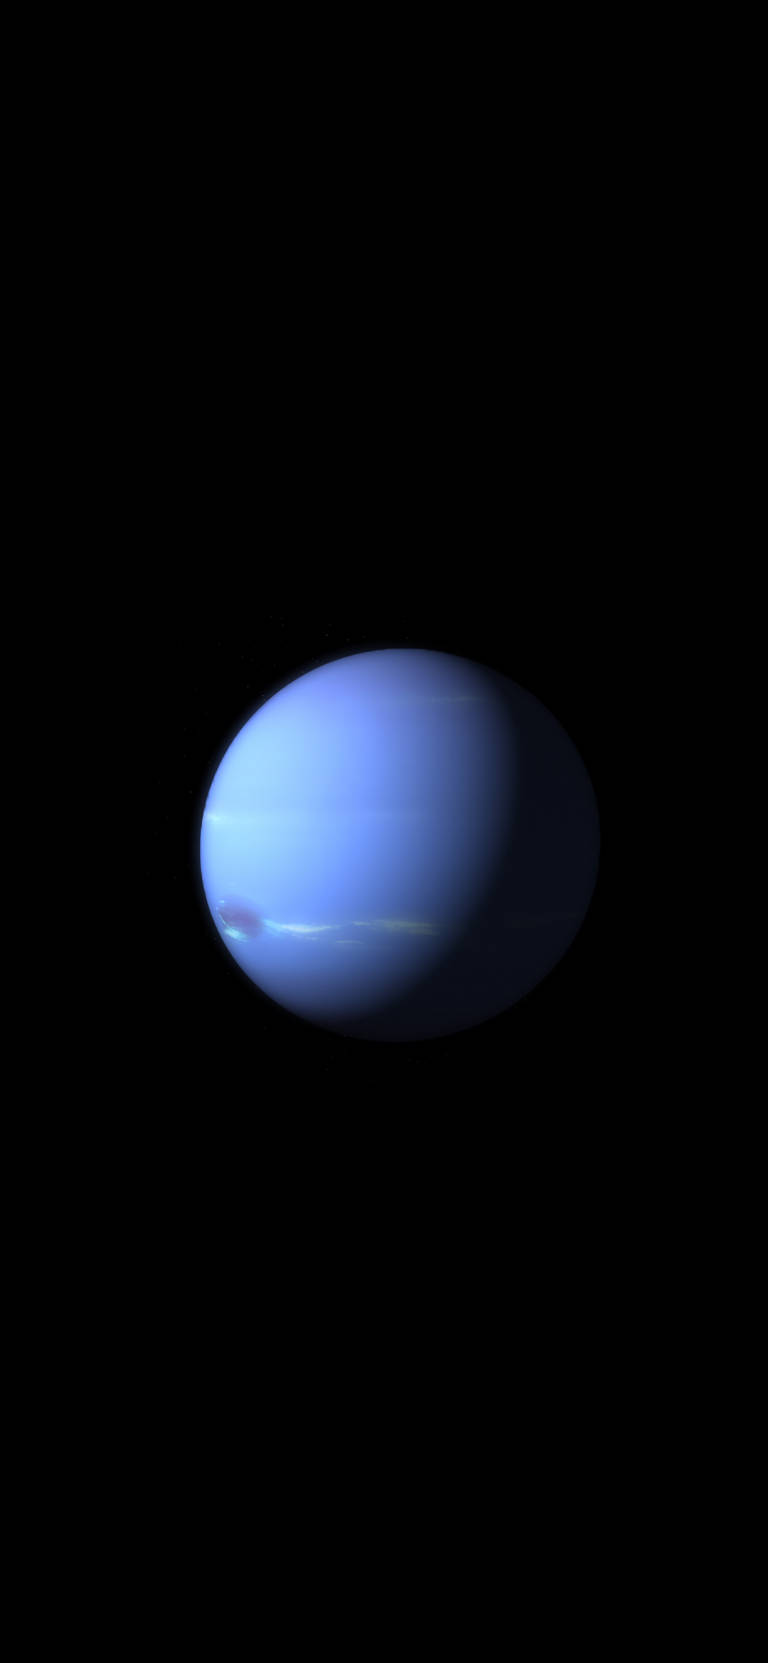 The alluring beauty of Neptune as viewed through the lens of the Original iPhone 4 Wallpaper